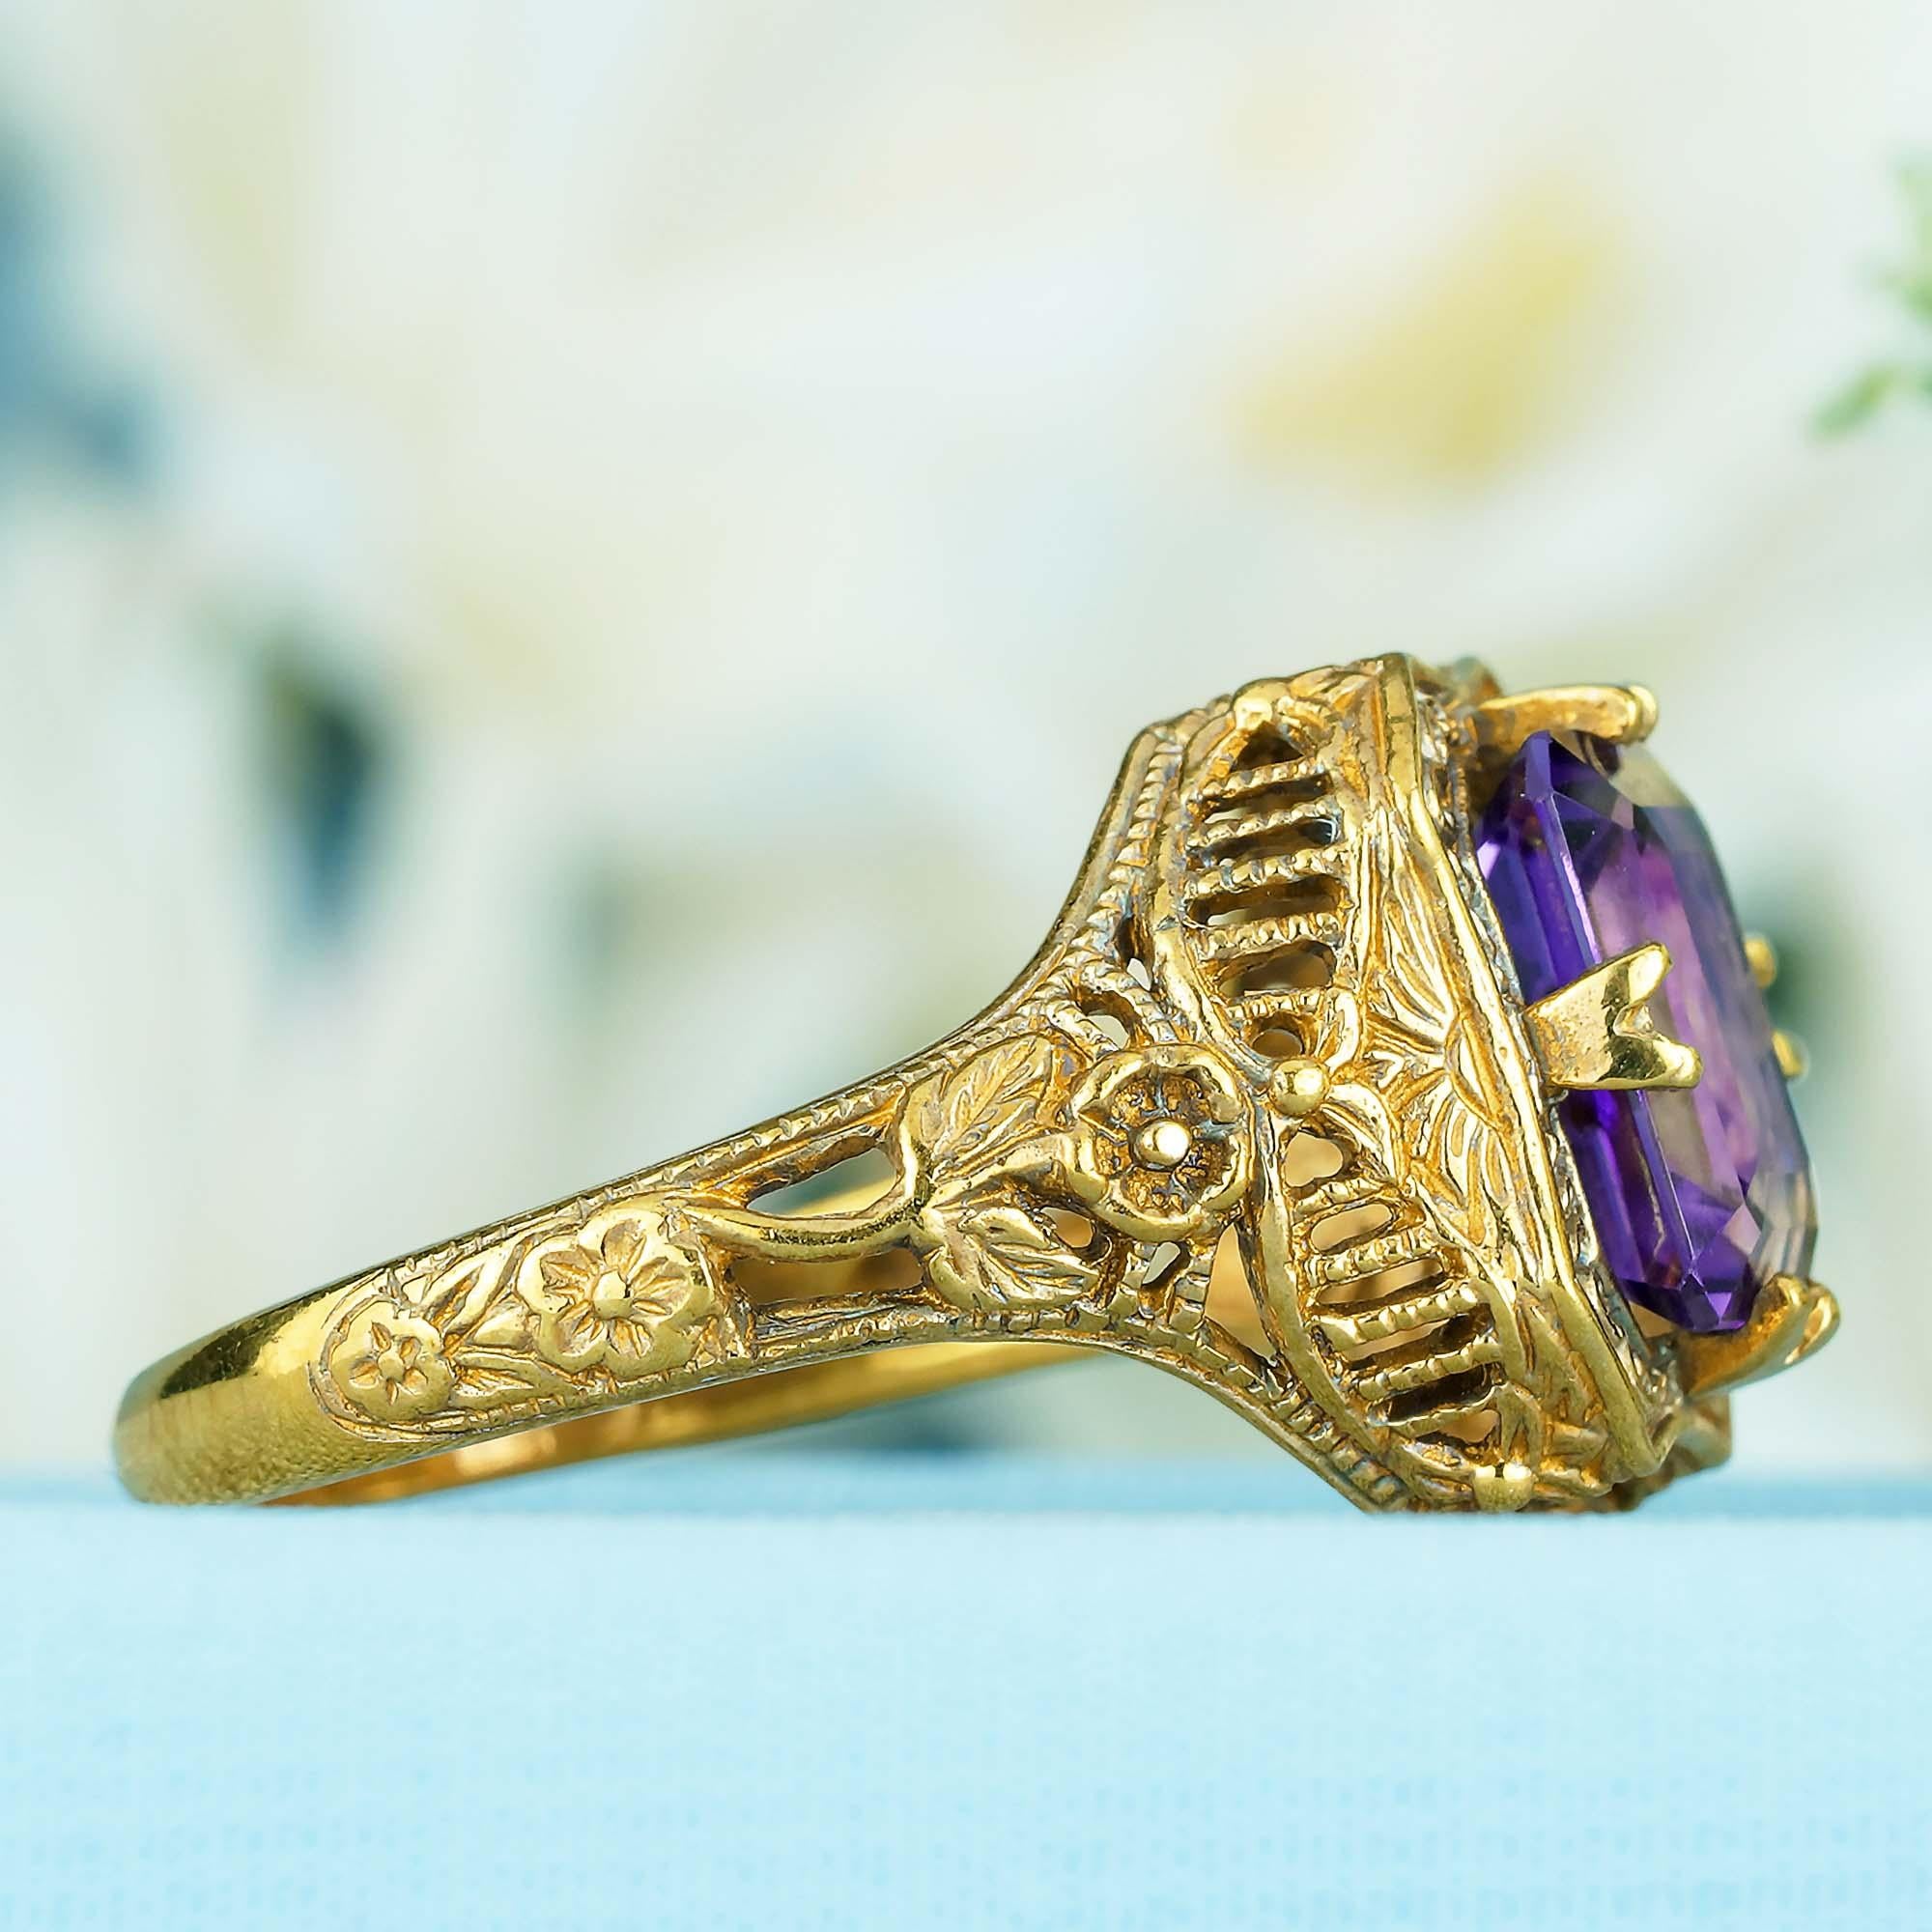 For Sale:  Natural Emerald Cut Amethyst Vintage Style Filigree Ring in Solid 9K Yellow Gold 4